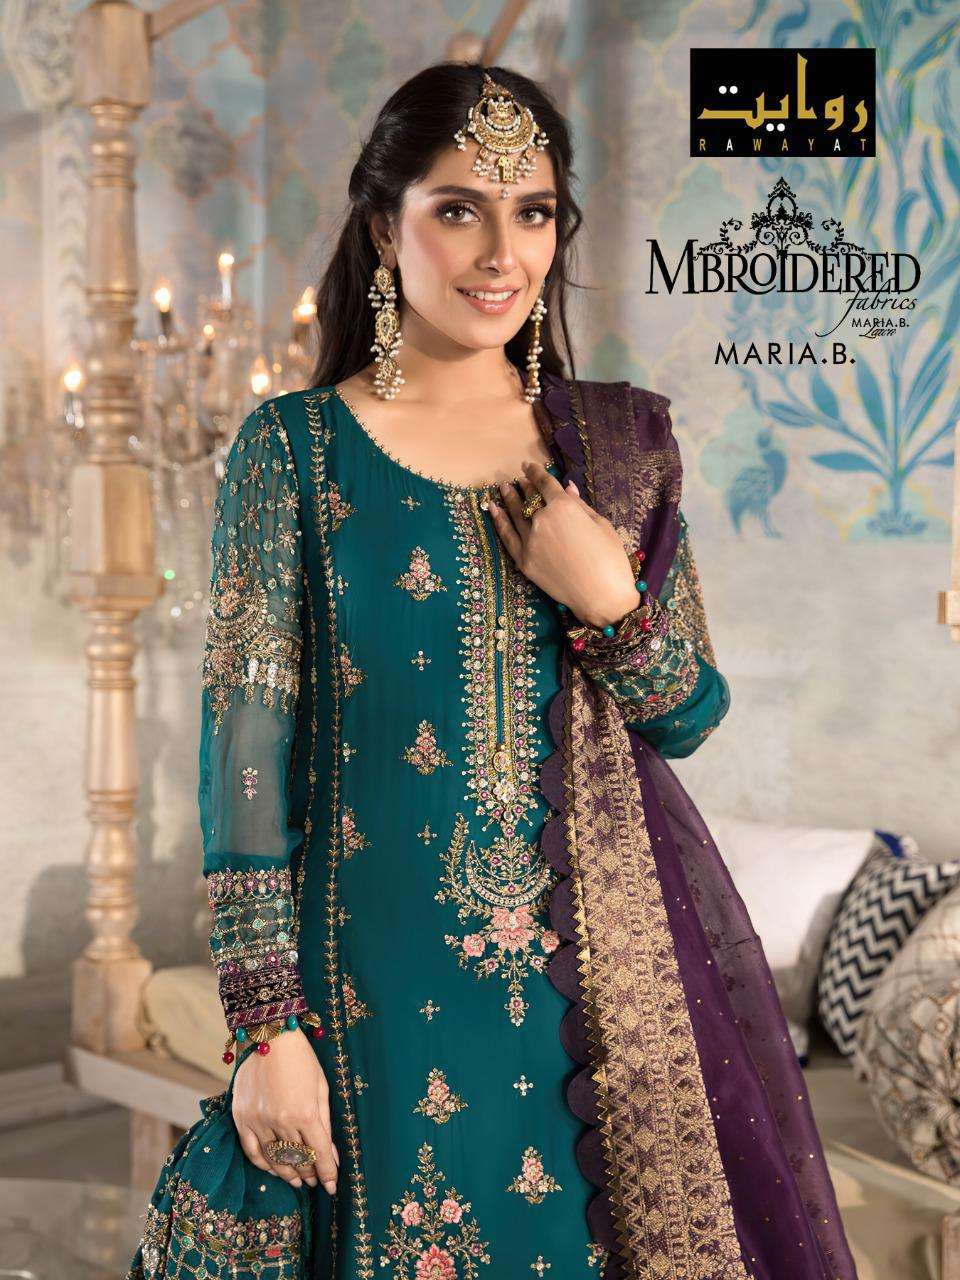 Rawayat Mbroidered Collection 2021 Georgette With Embroidery Work ...